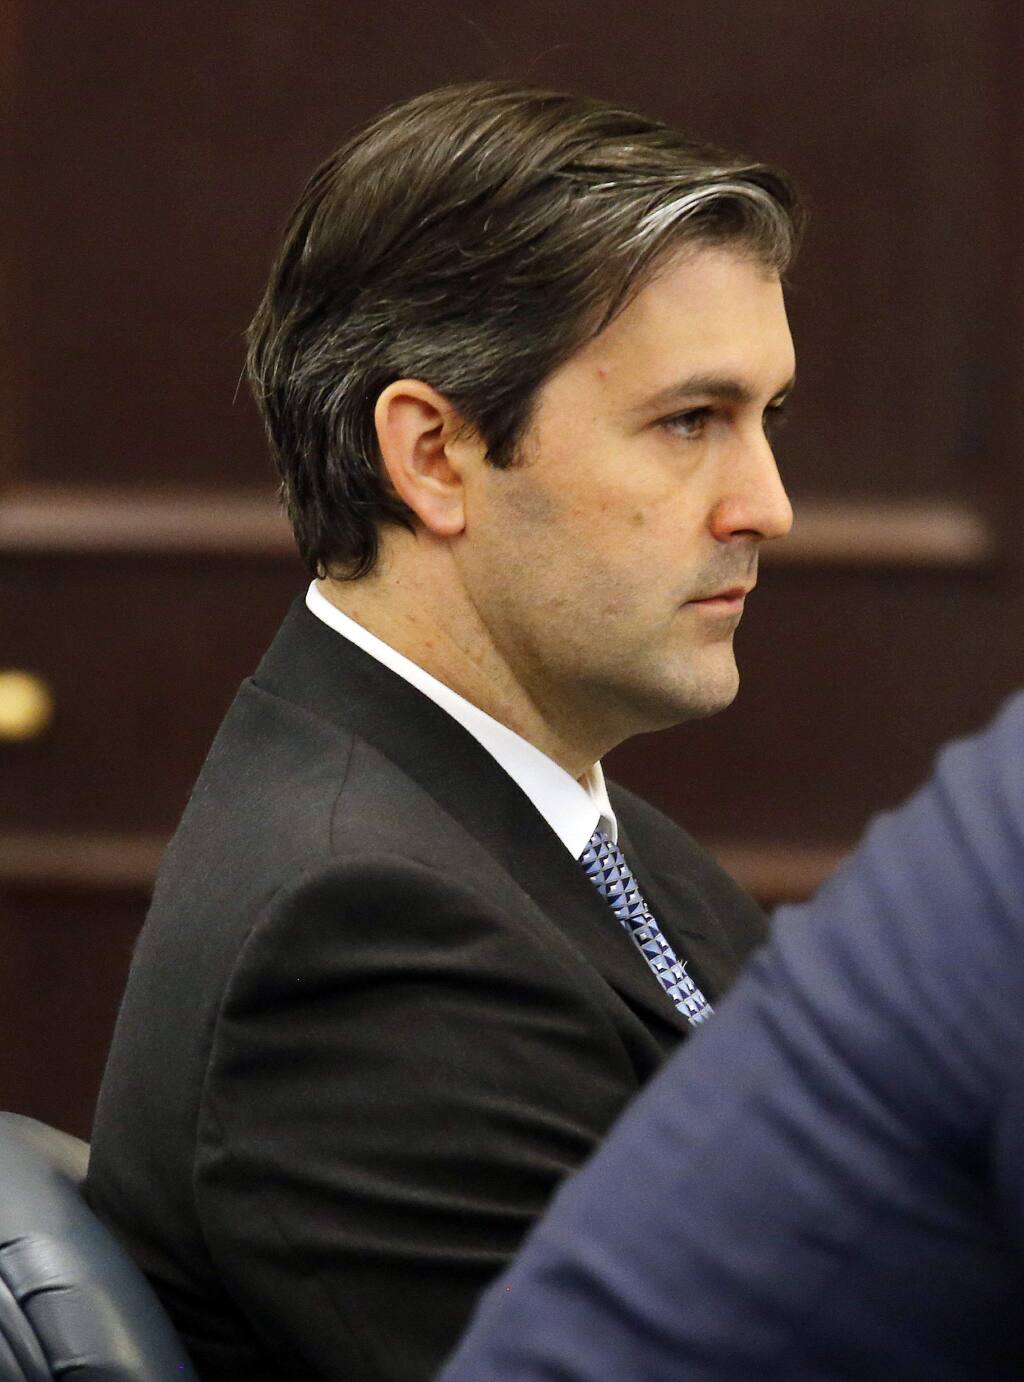 Former North Charleston police officer Michael Slager listens as Judge Clifton Newman declares a mistrial at the Charleston County court in Charleston, S.C., Monday. Dec, 5, 2016. Slager was charged with murder in the shooting death of an unarmed black motorist. (Grace Beahm/Post and Courier via AP, Pool)